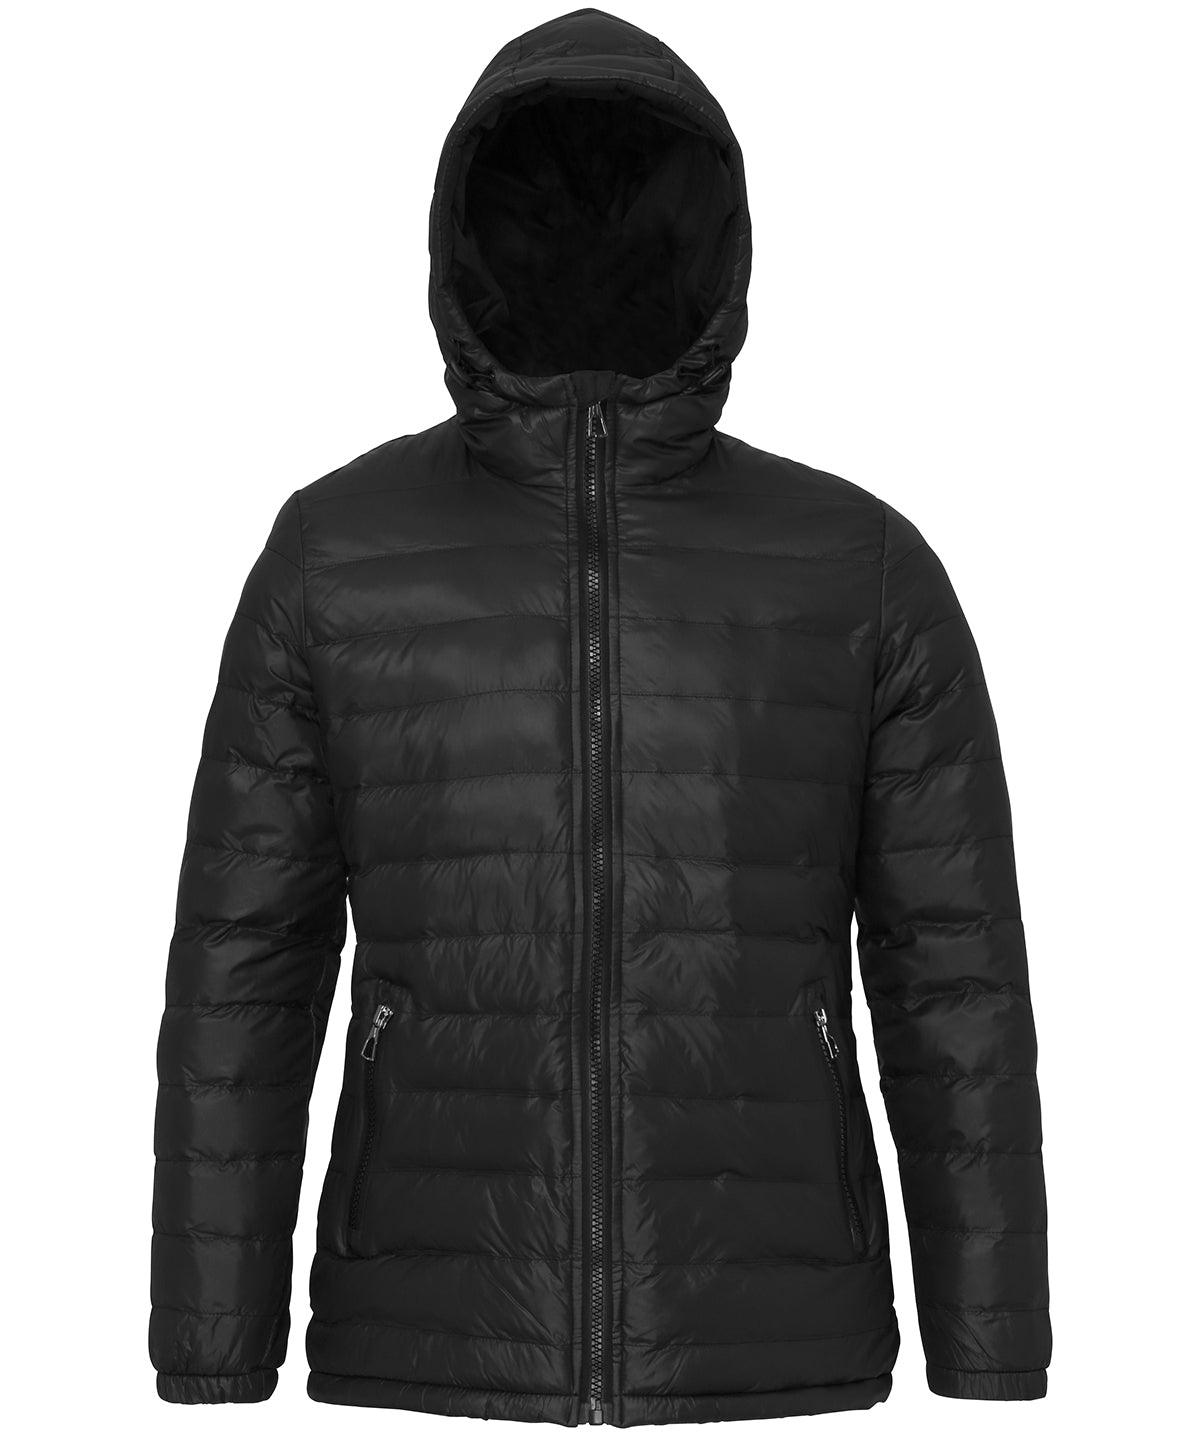 Black/Black* - Women's padded jacket Jackets 2786 Jackets & Coats, Must Haves, Padded & Insulation Schoolwear Centres